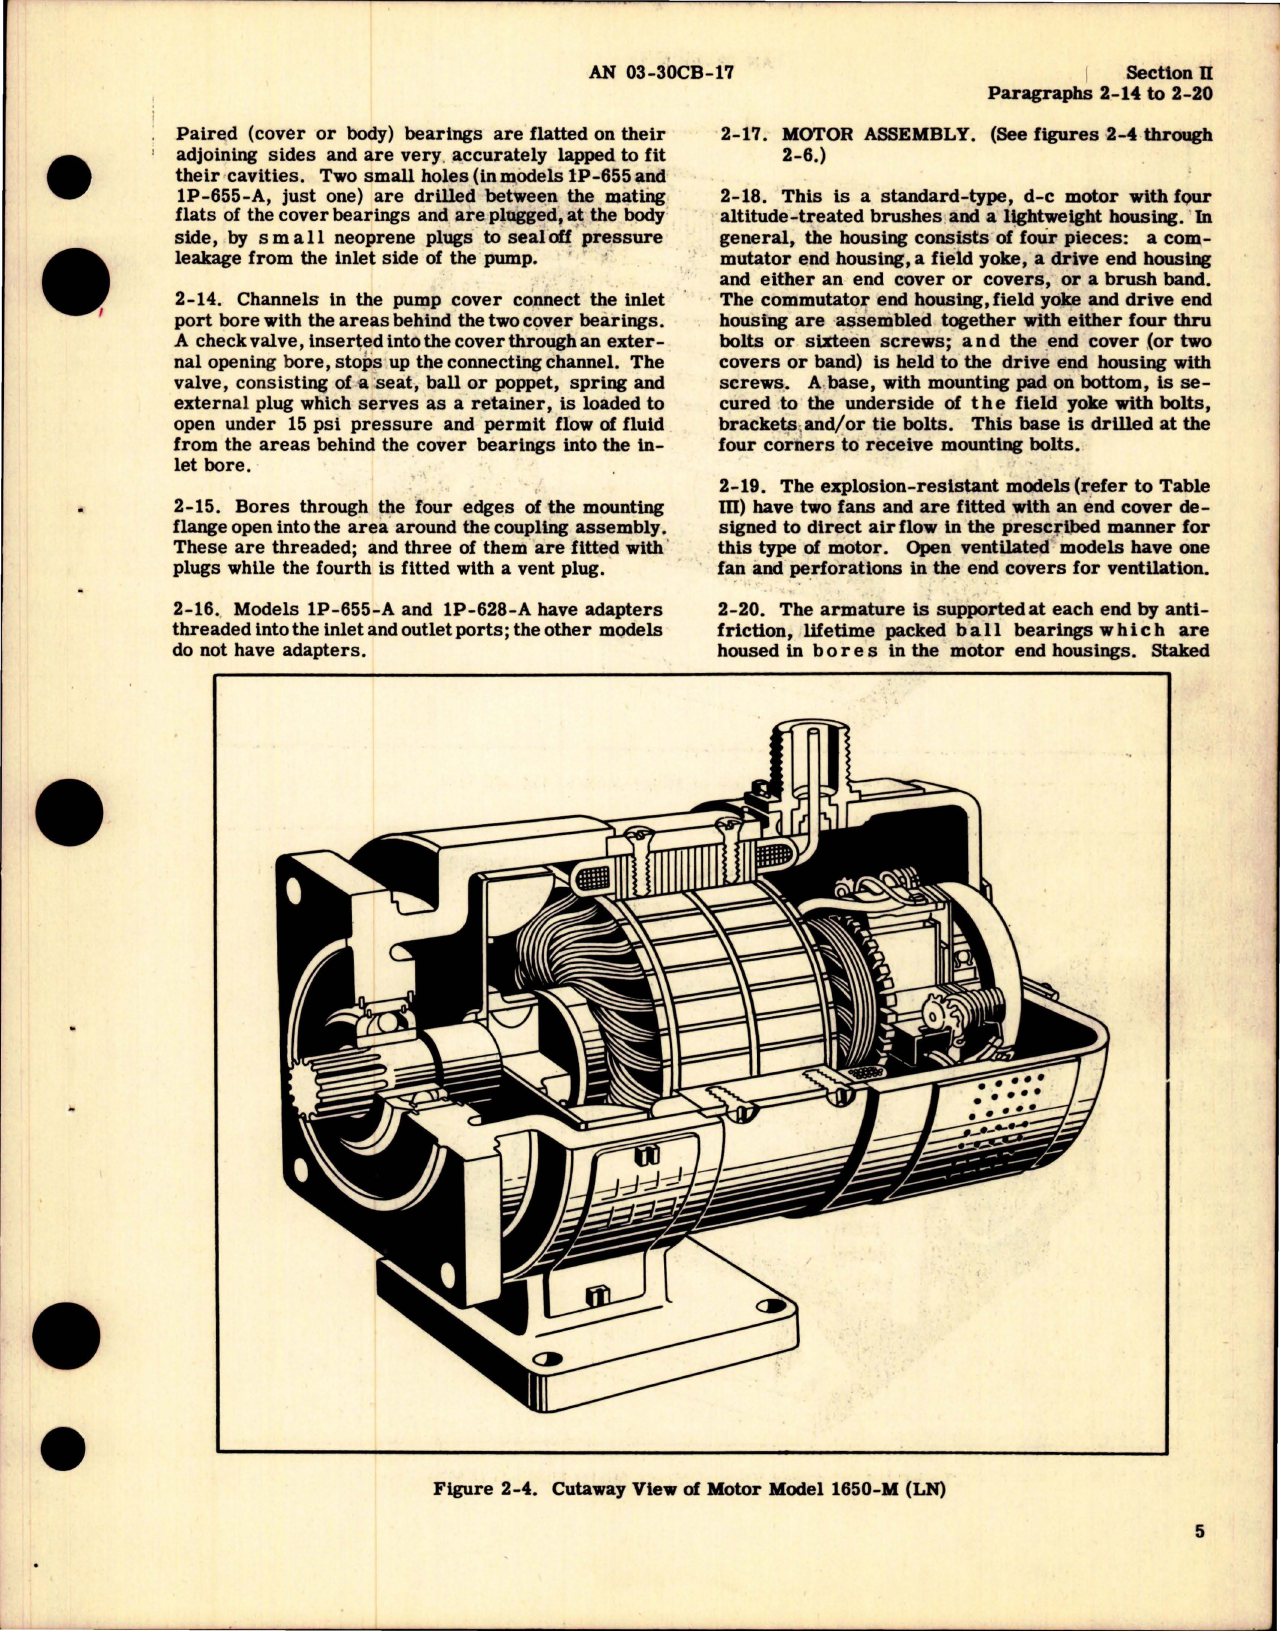 Sample page 9 from AirCorps Library document: Hydraulic Gear Pump